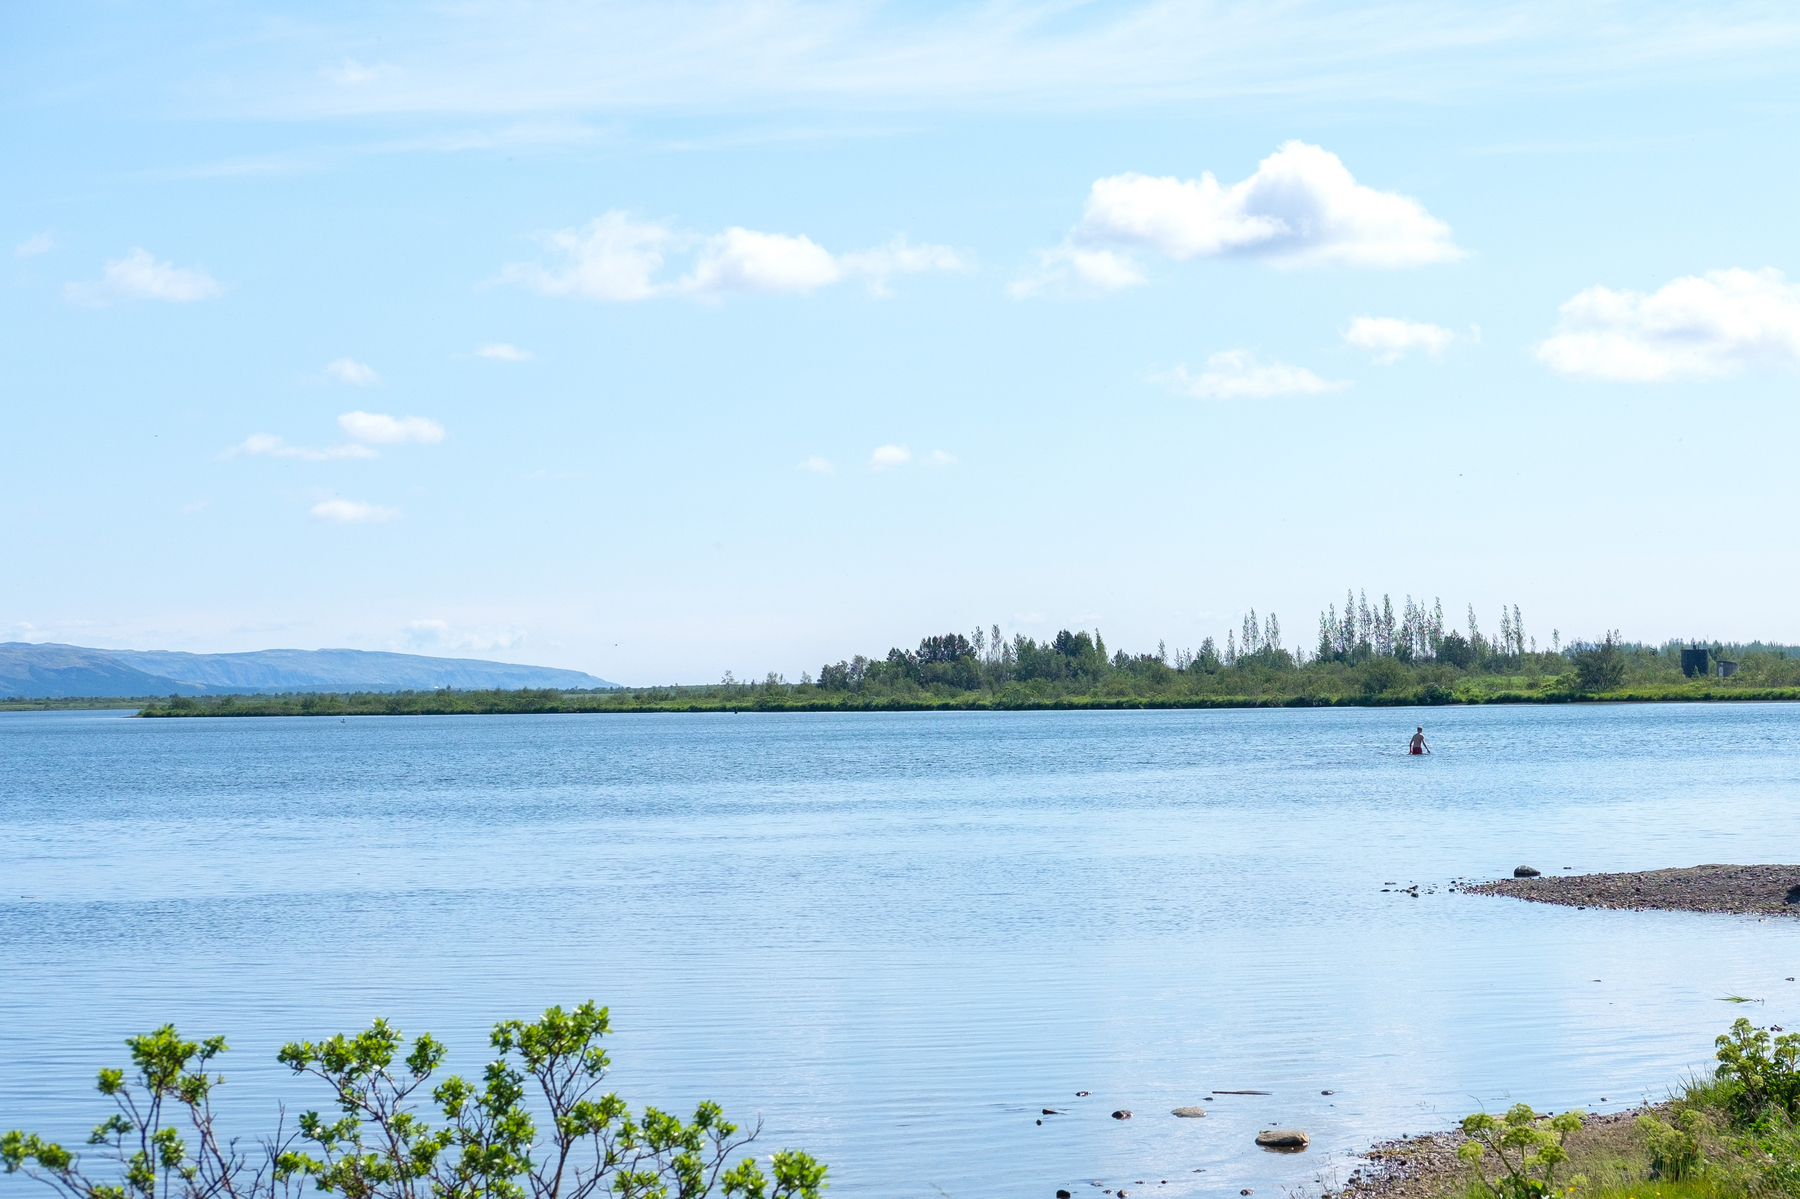 A person wades through Laugarvatn lake in the distance.